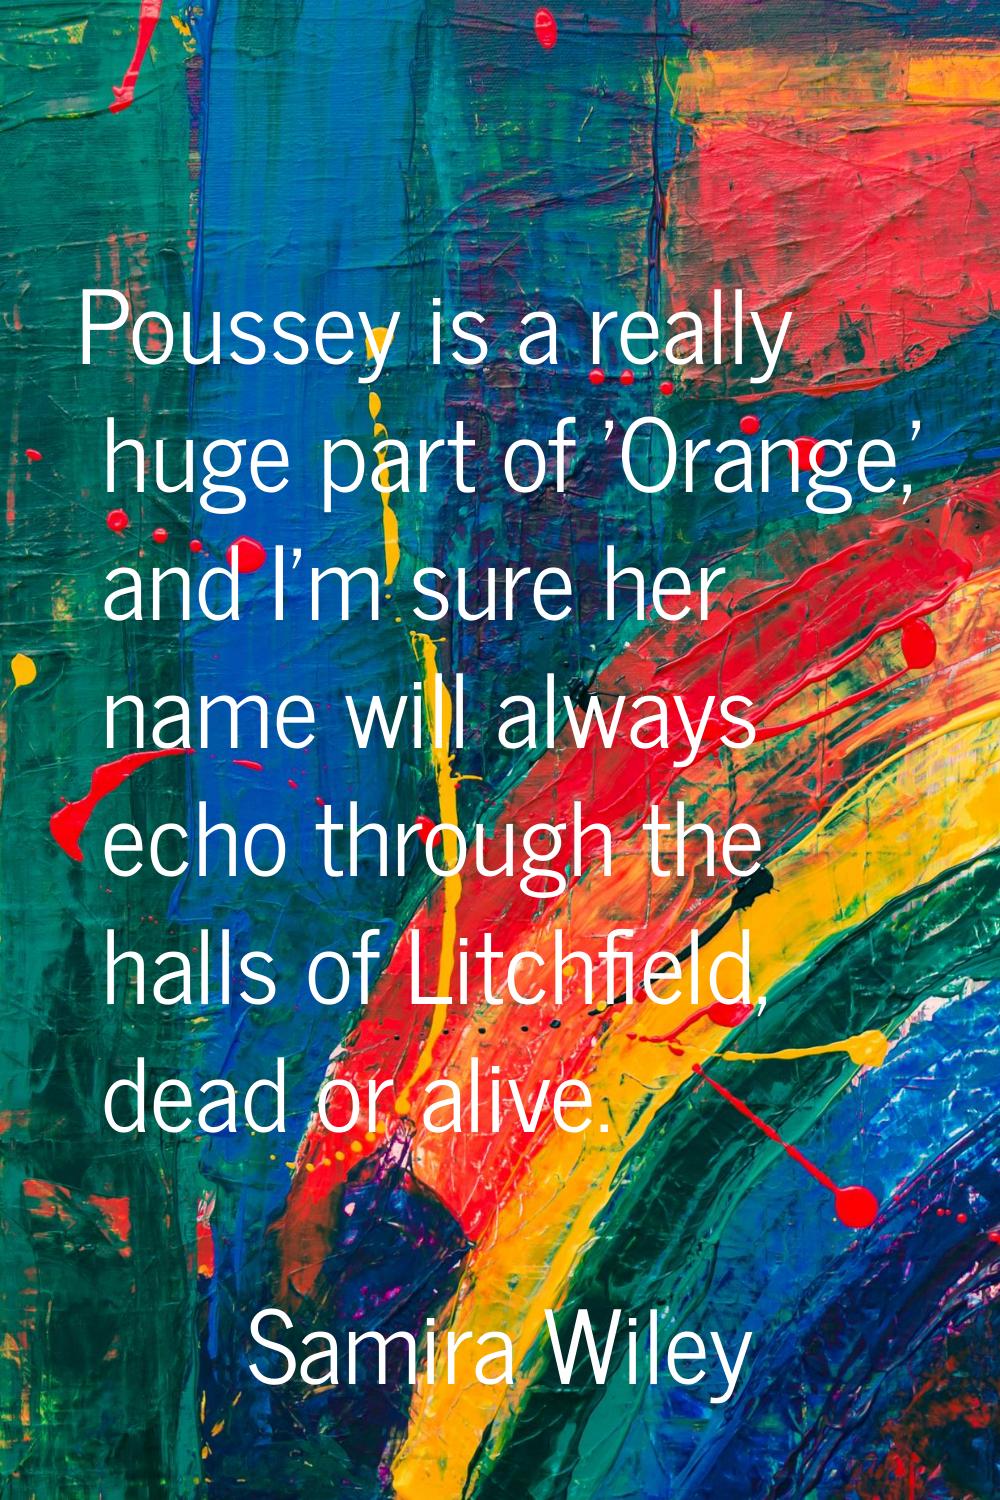 Poussey is a really huge part of 'Orange,' and I'm sure her name will always echo through the halls